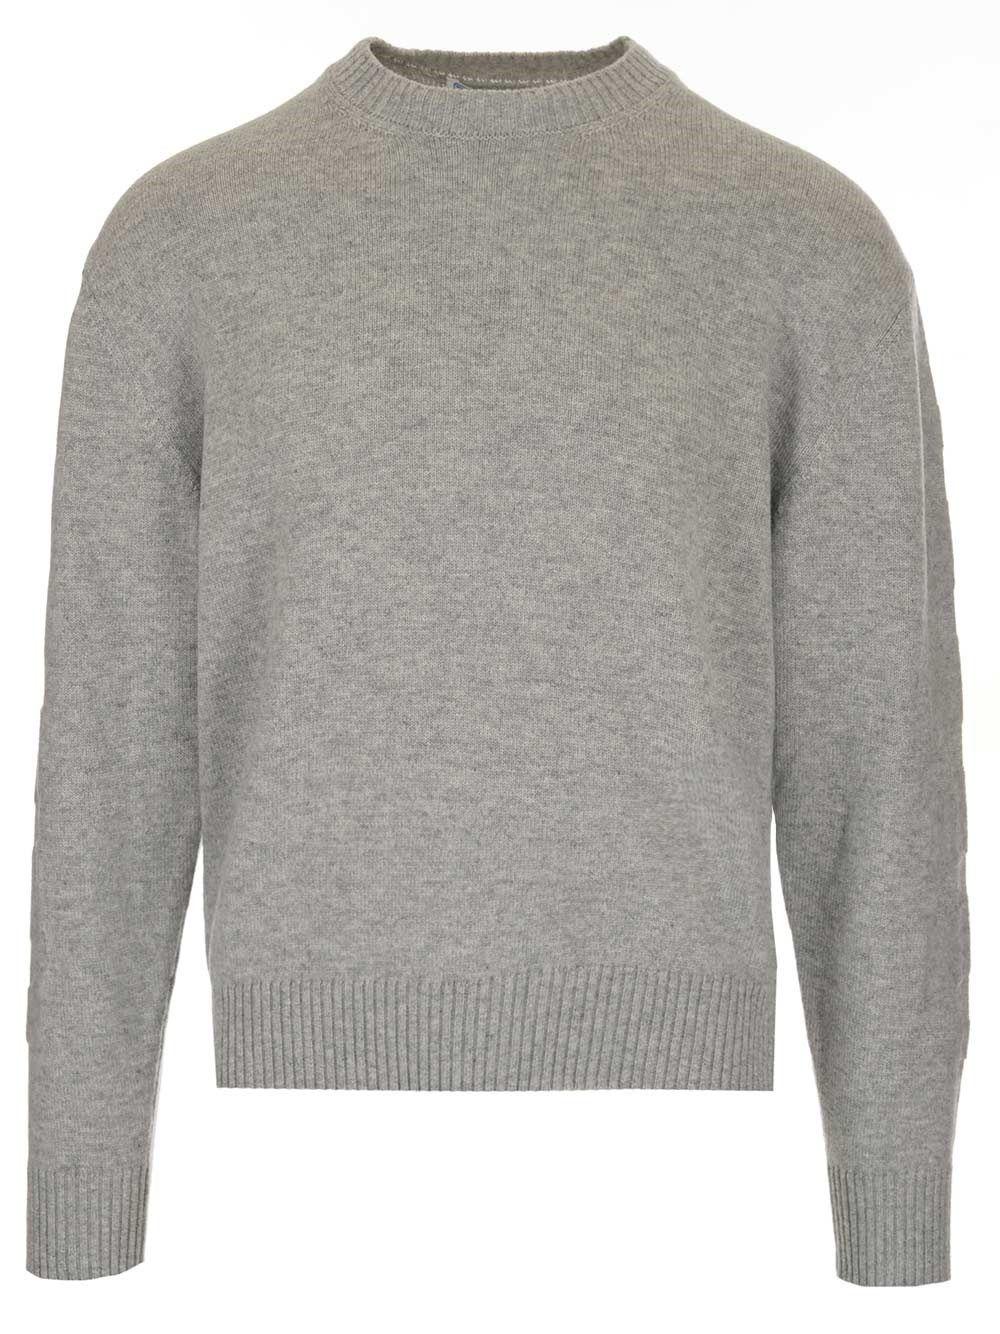 Off-White c/o Virgil Abloh Cashmere Sweater in Grey (Gray) for Men - Lyst